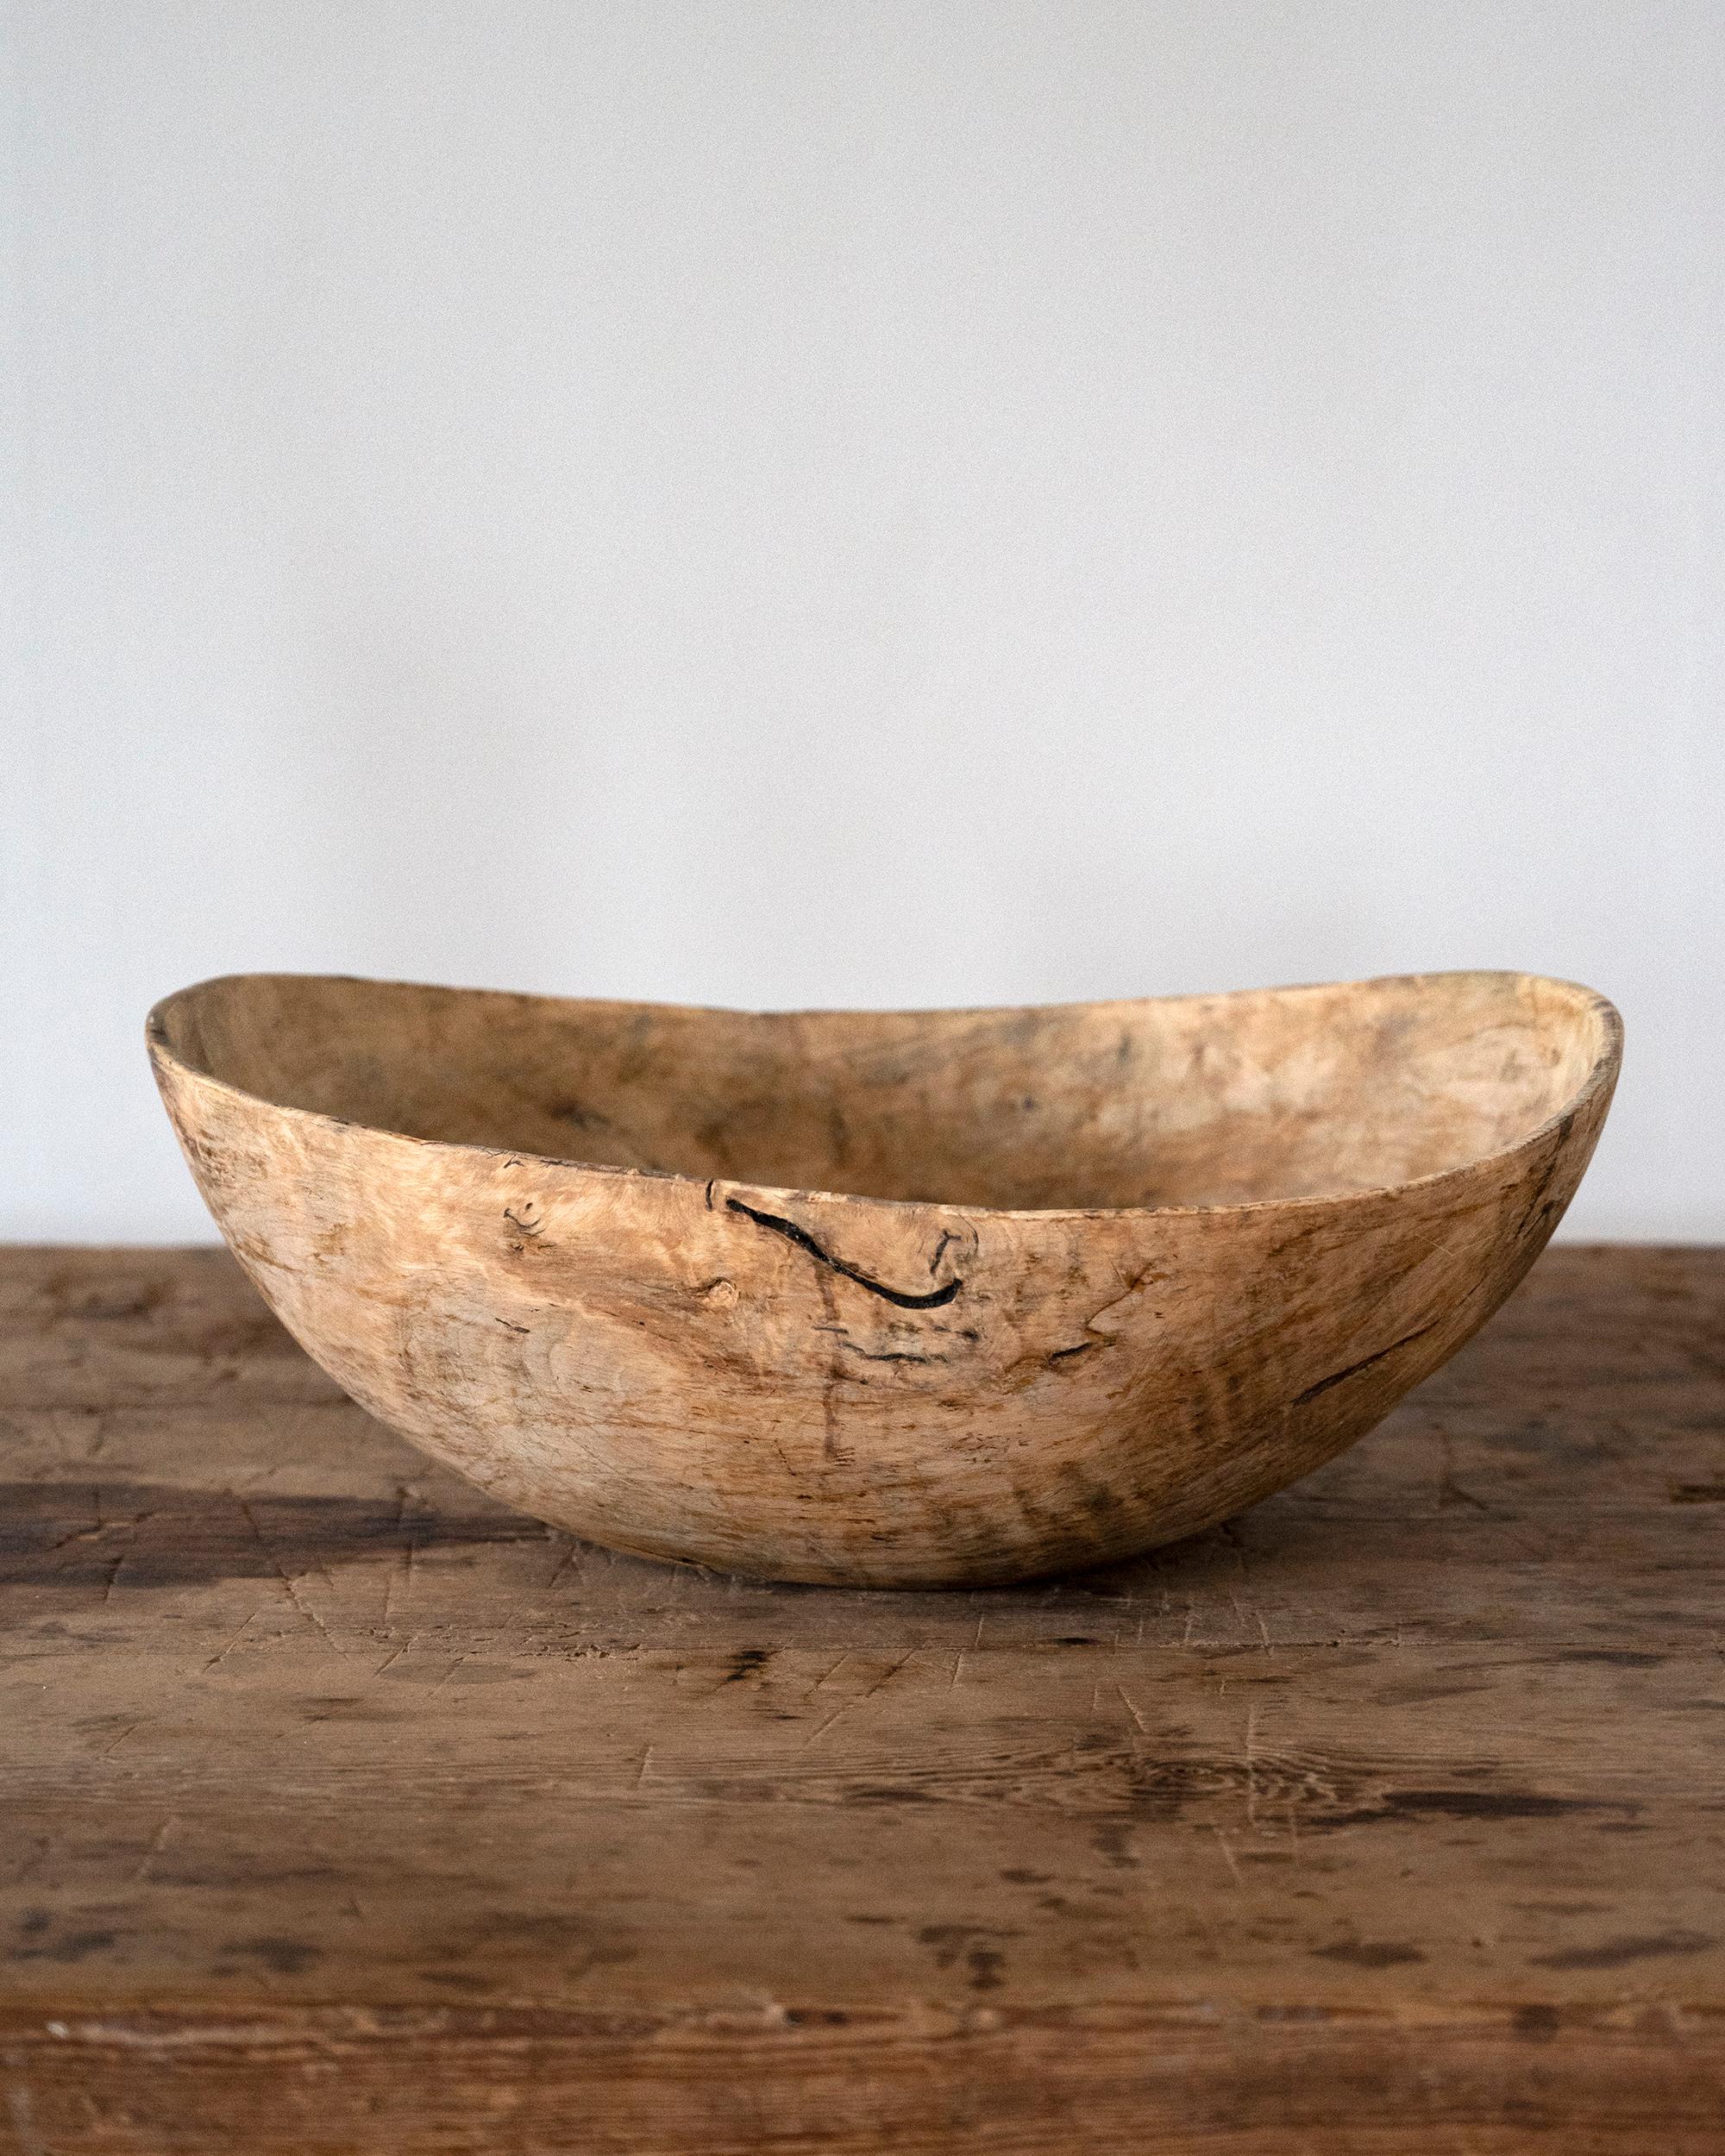 Sculptural early 19th century Swedish root wood bowl with a natural organic form. ca 1800 Sweden. 

